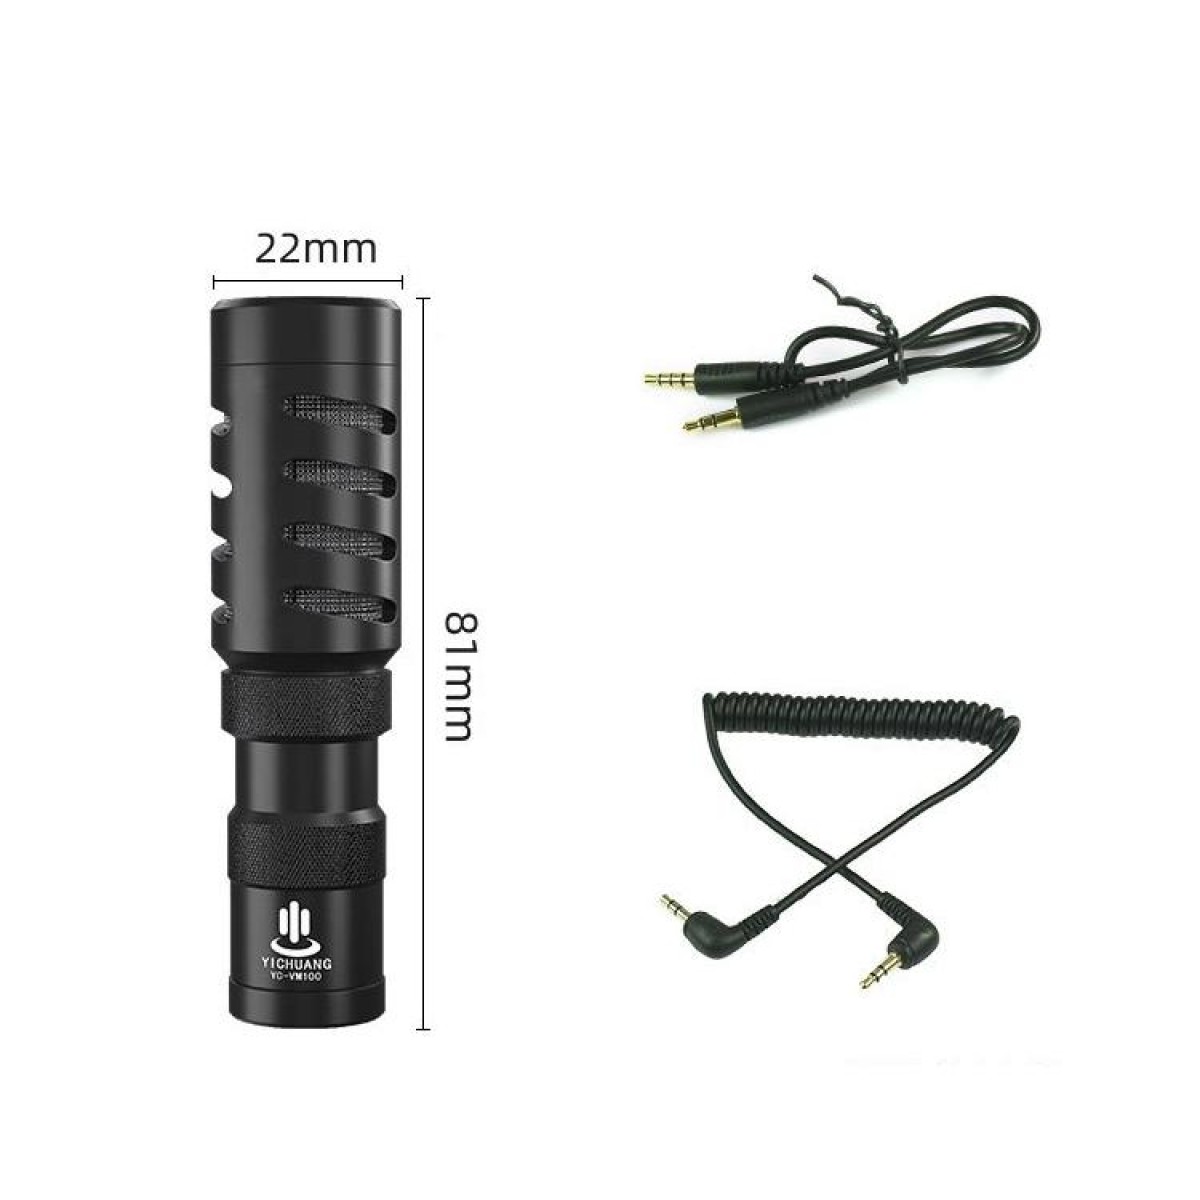 YICHUANG YC-VM100 3.5mm Port Portable Pointing Noise Reduction Microphone